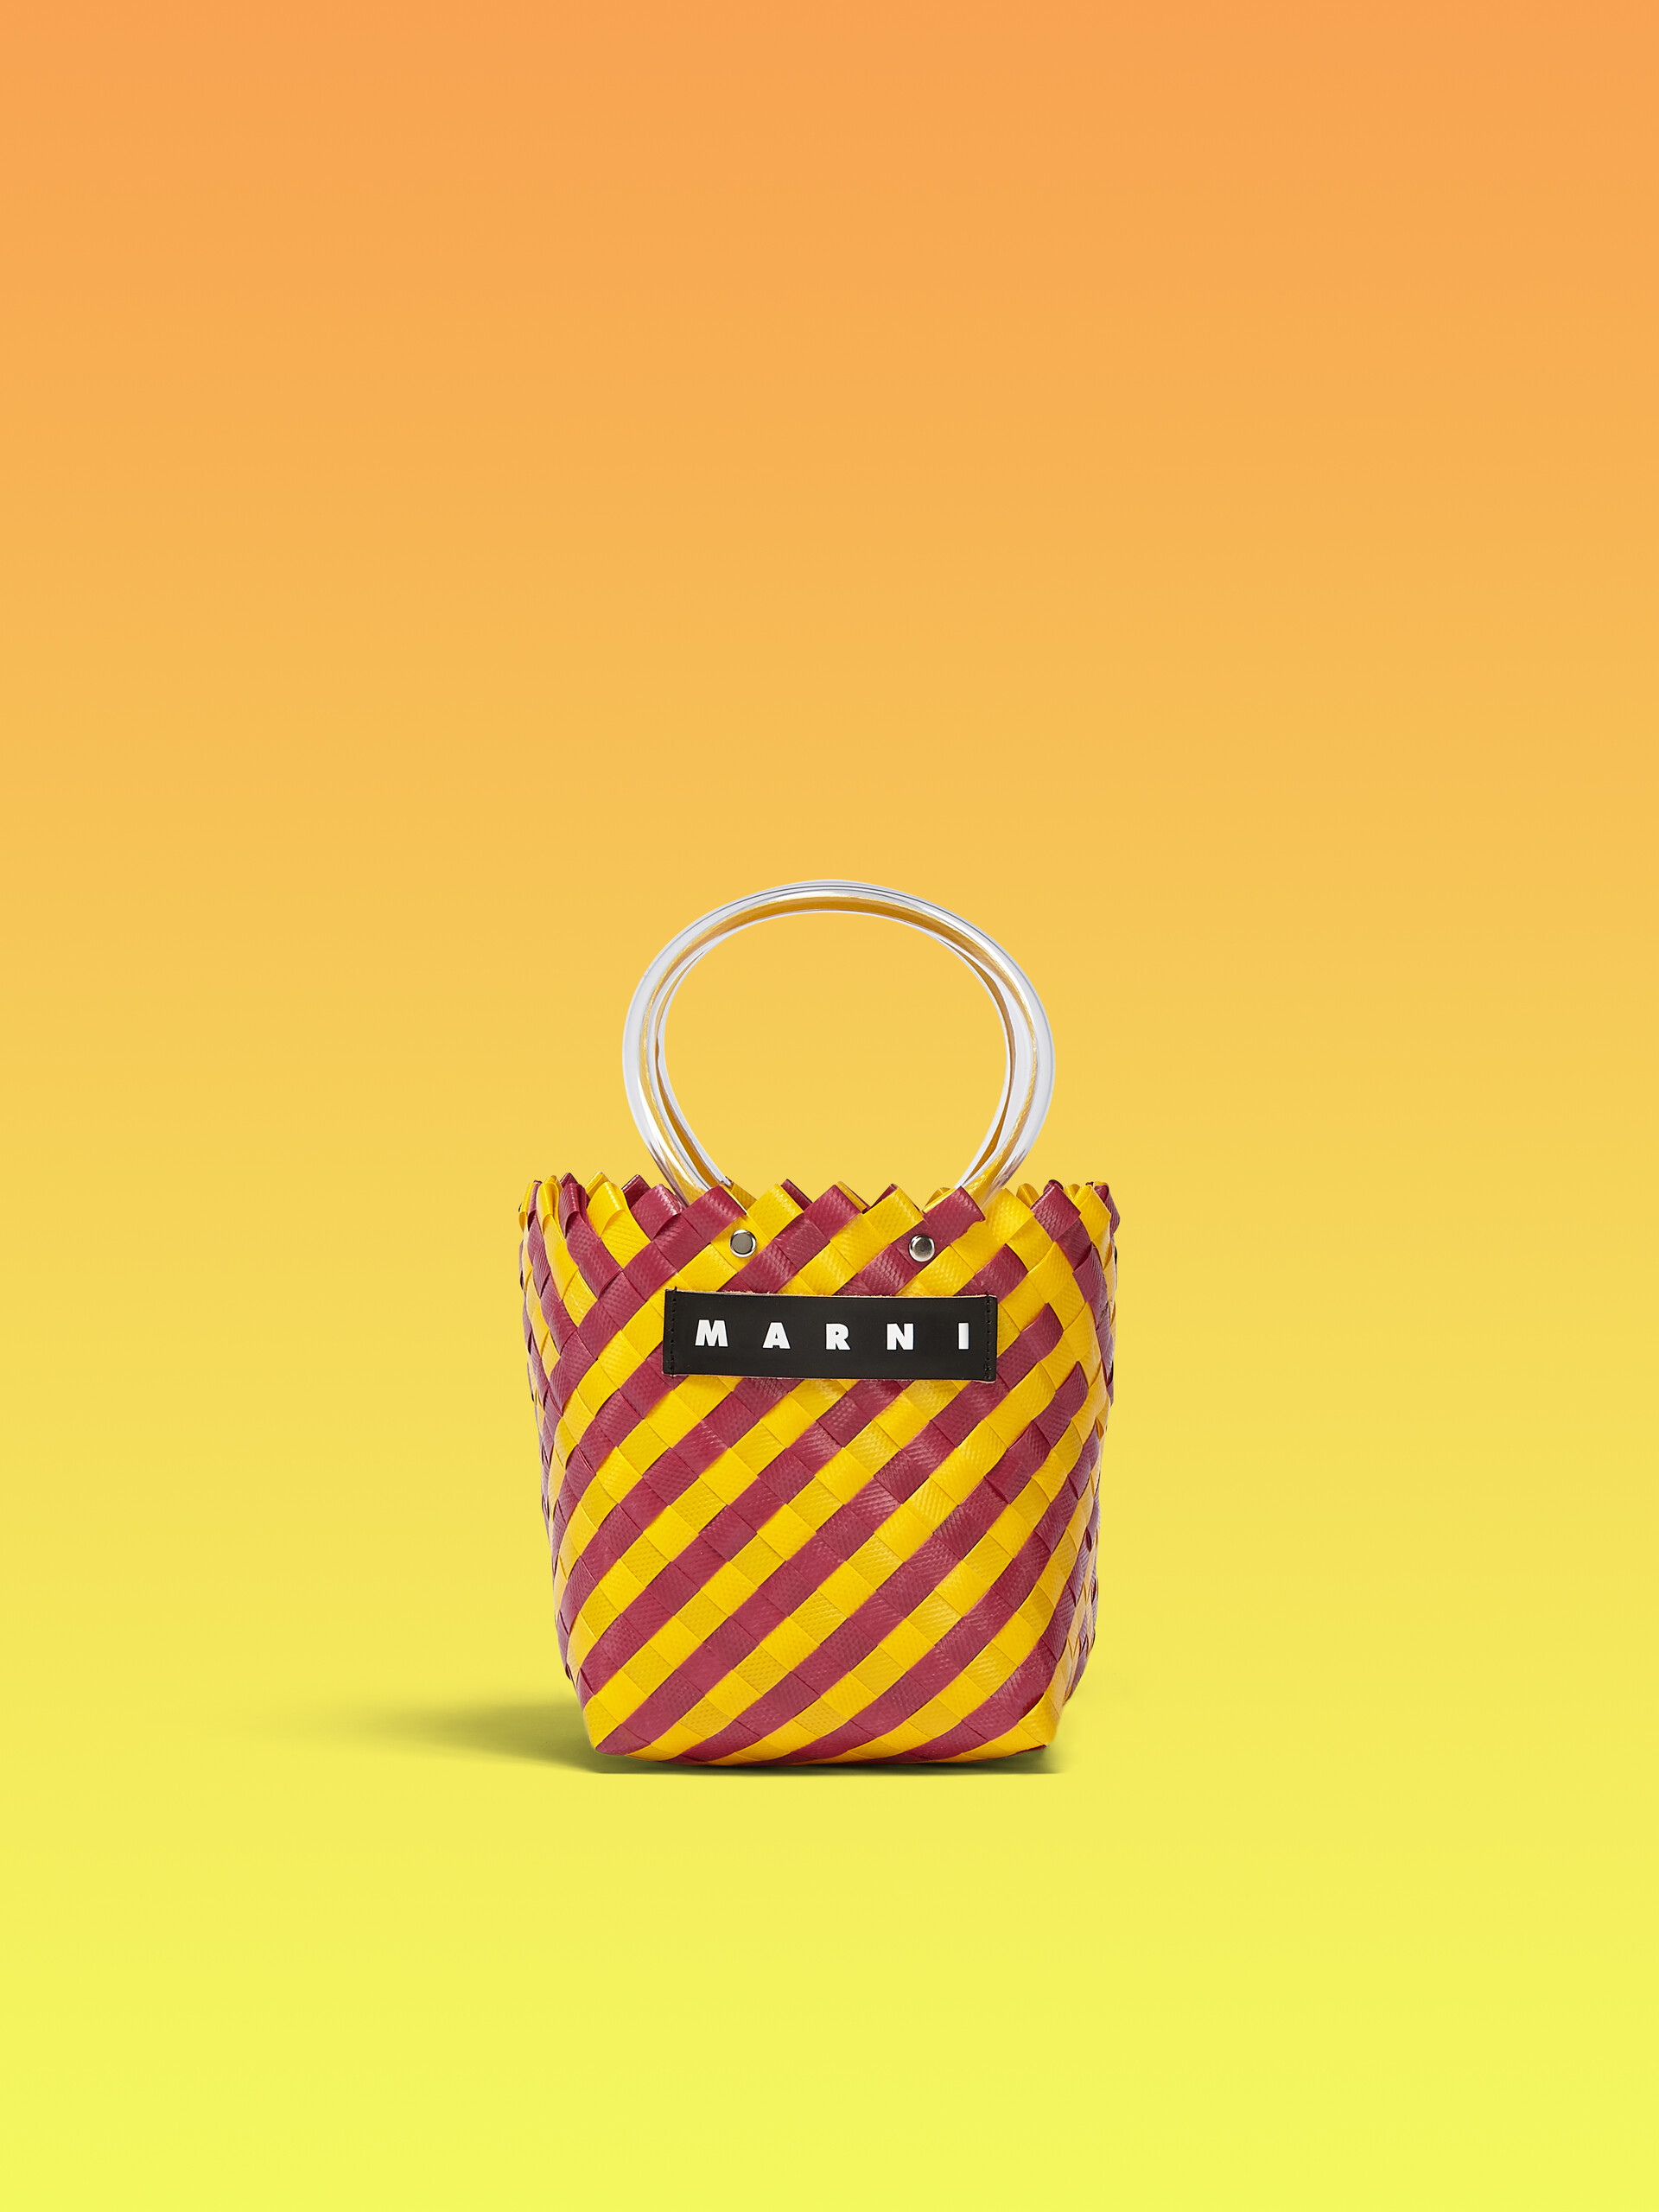 MARNI MARKET bag in yellow and burgundy woven material - Bags - Image 1